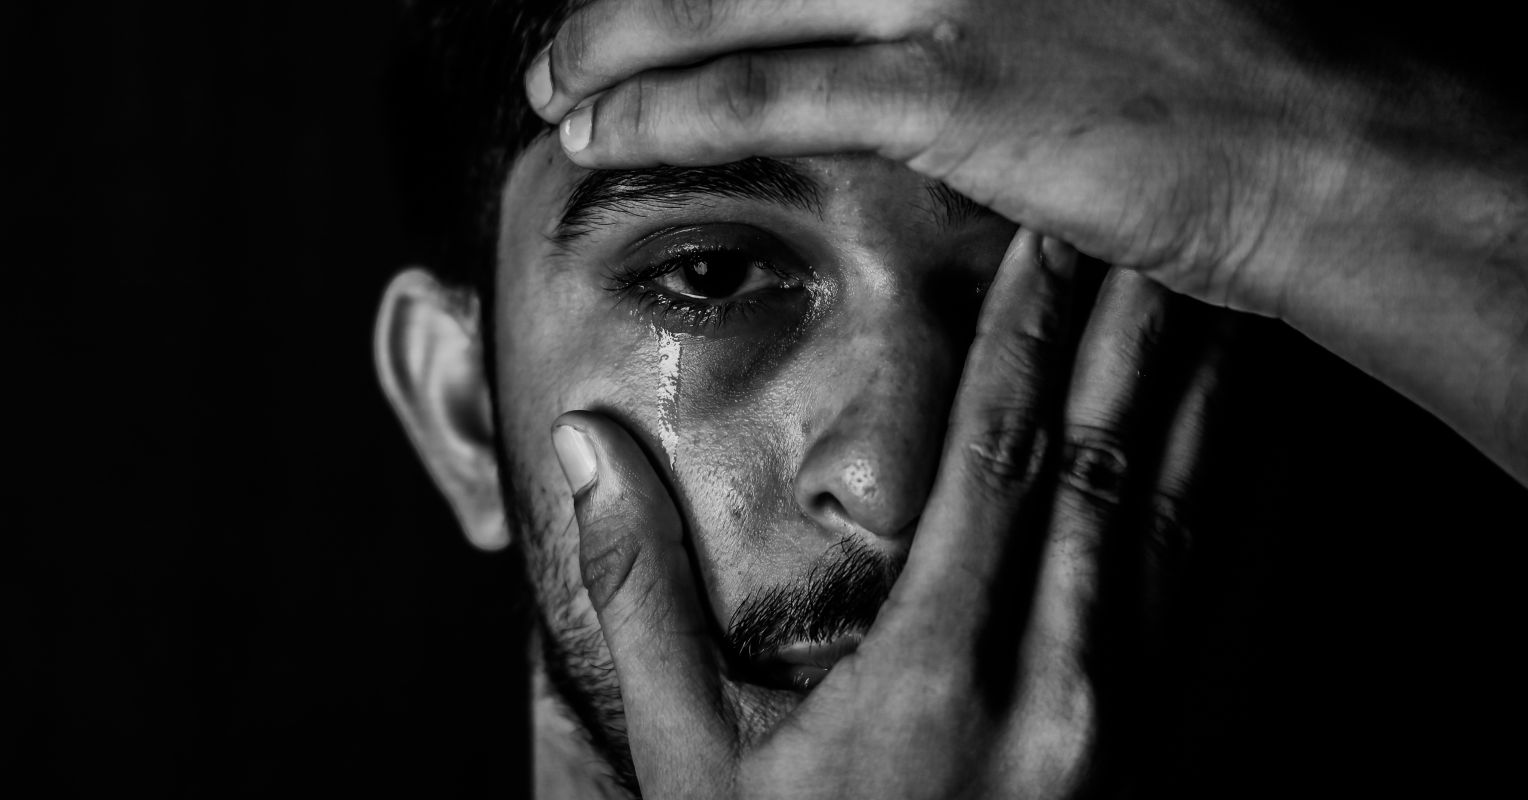 Exposure to women's tears decreases aggression in men •